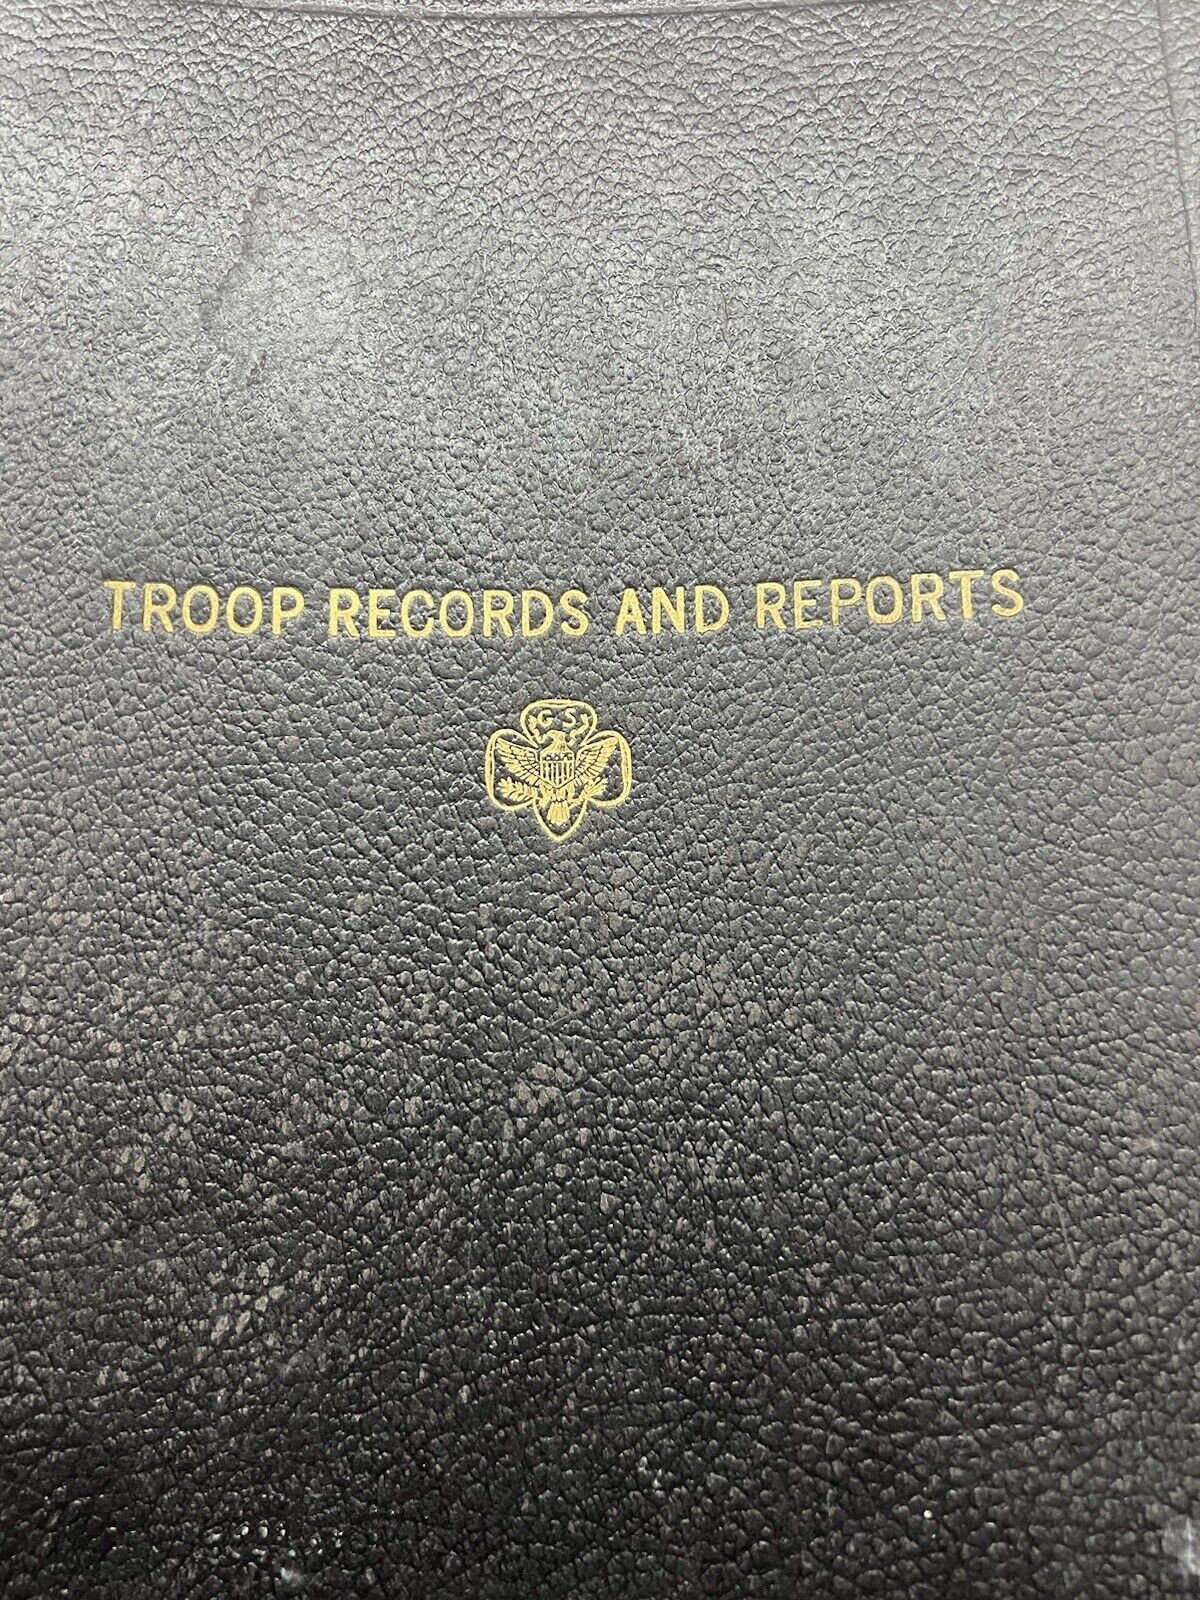 Vintage Girl Scout Troop Records And Reports Book 1955-1959 With Reports